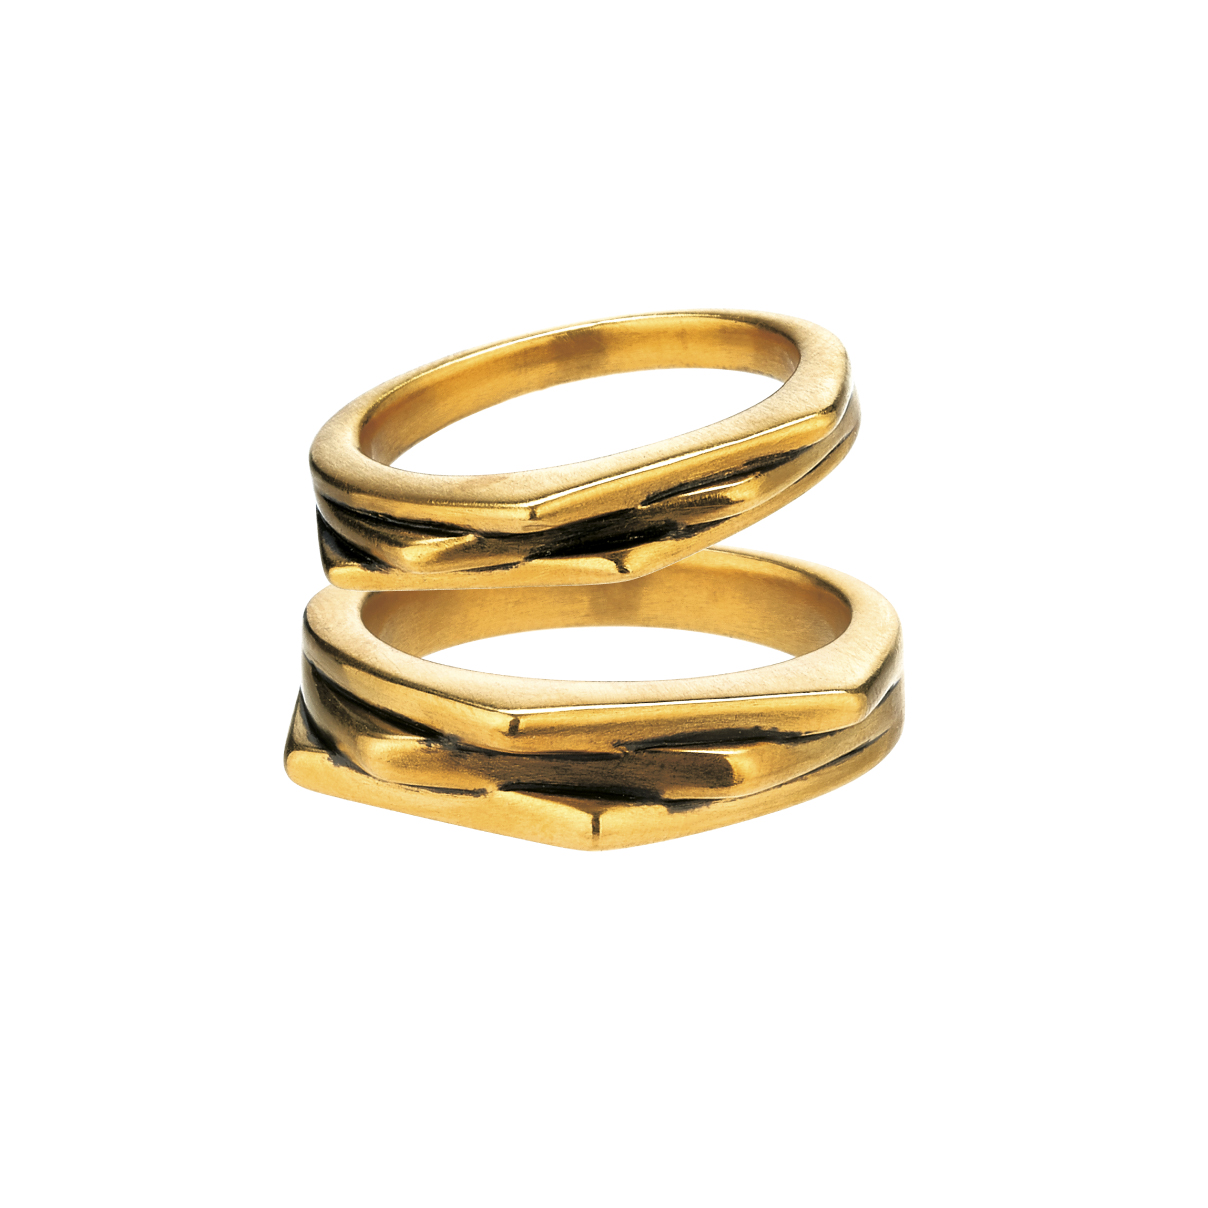 F-style Hey Cool Gold Rings